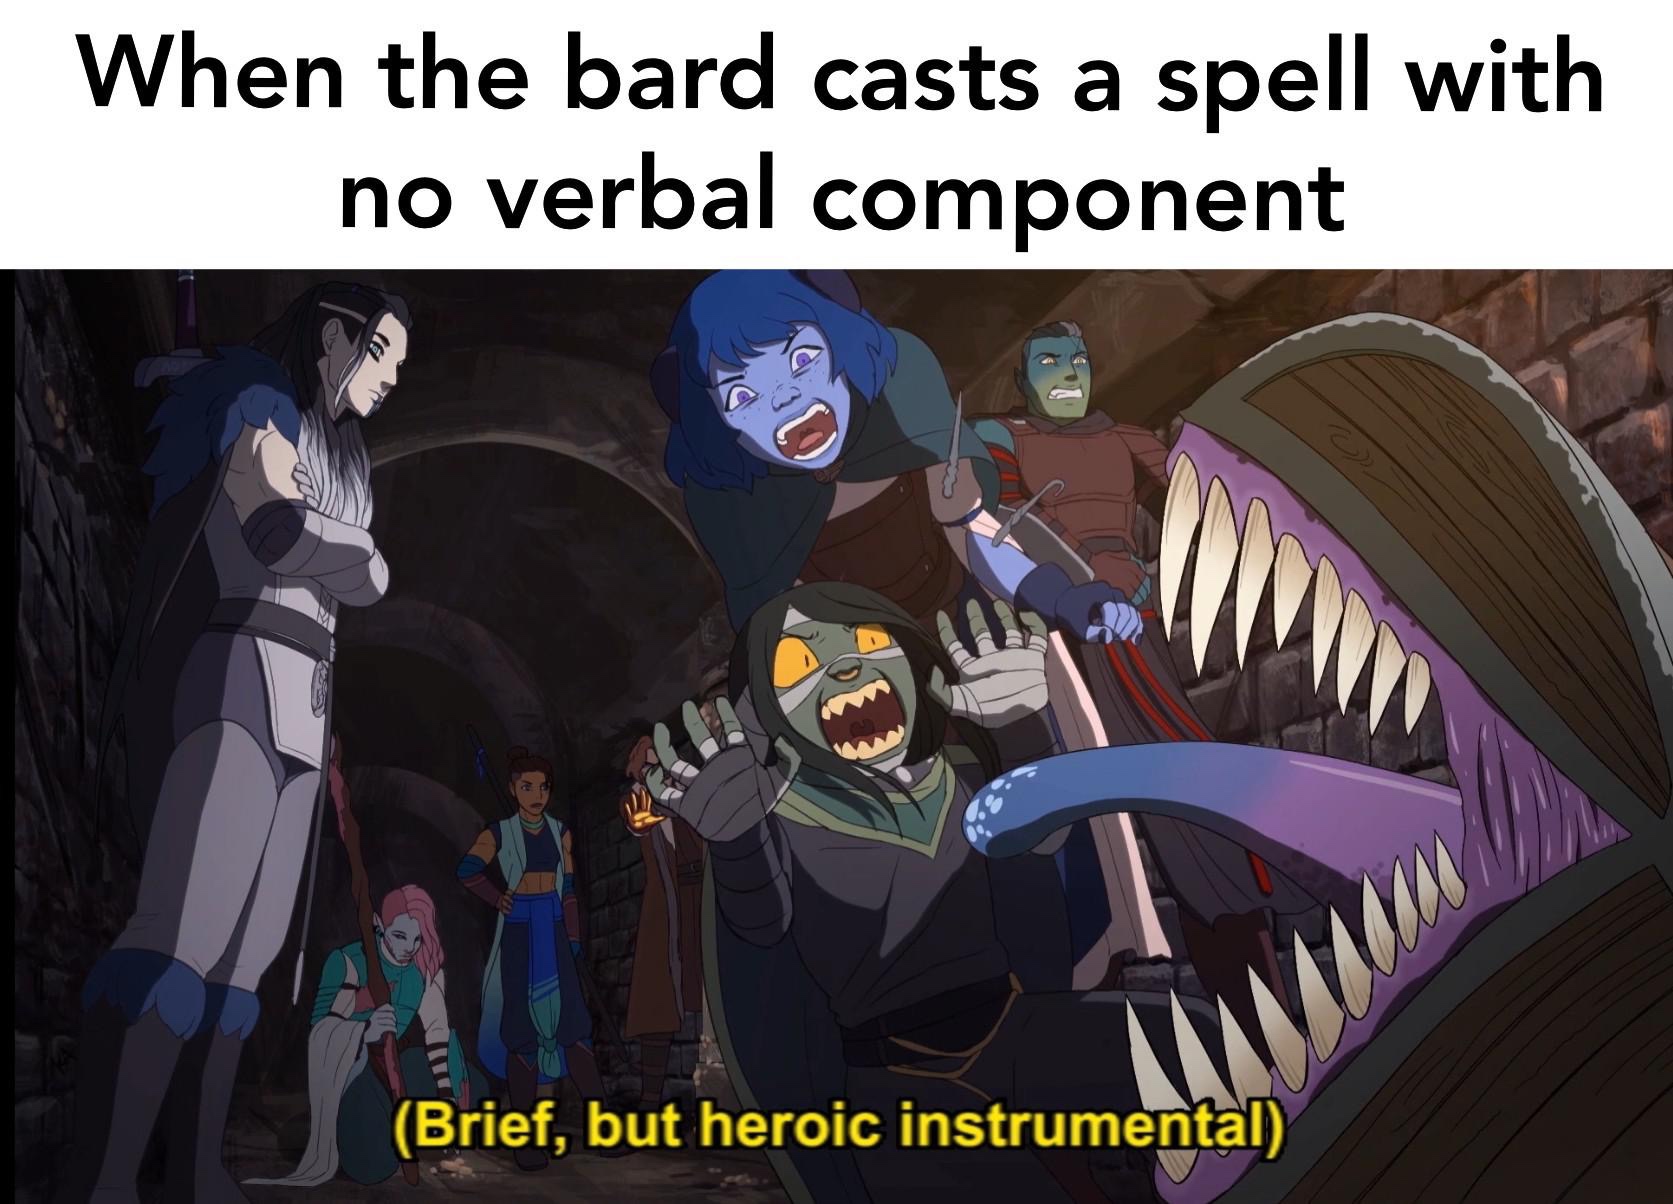 mighty nein memes - When the bard casts a spell with no verbal component Brief, but heroic instrumental